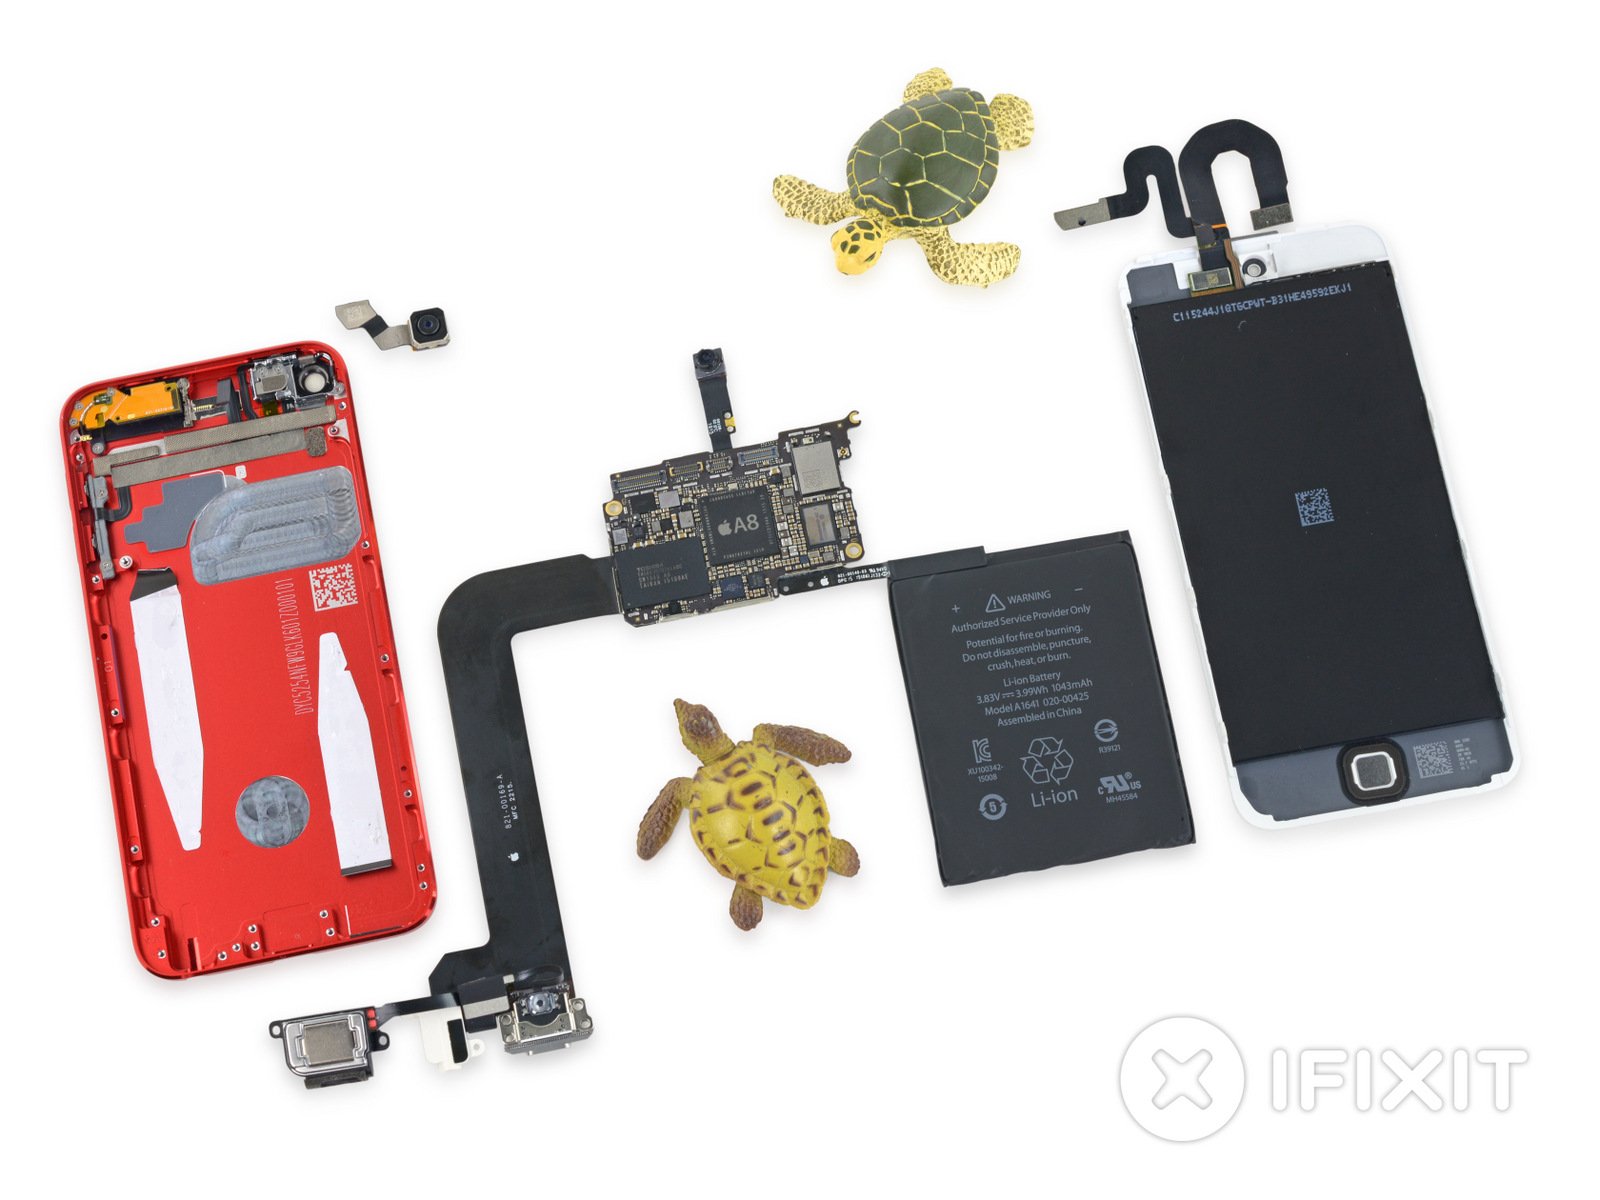 New iPod touch teardown reveals 1,043mAh battery and 1GB of RAM